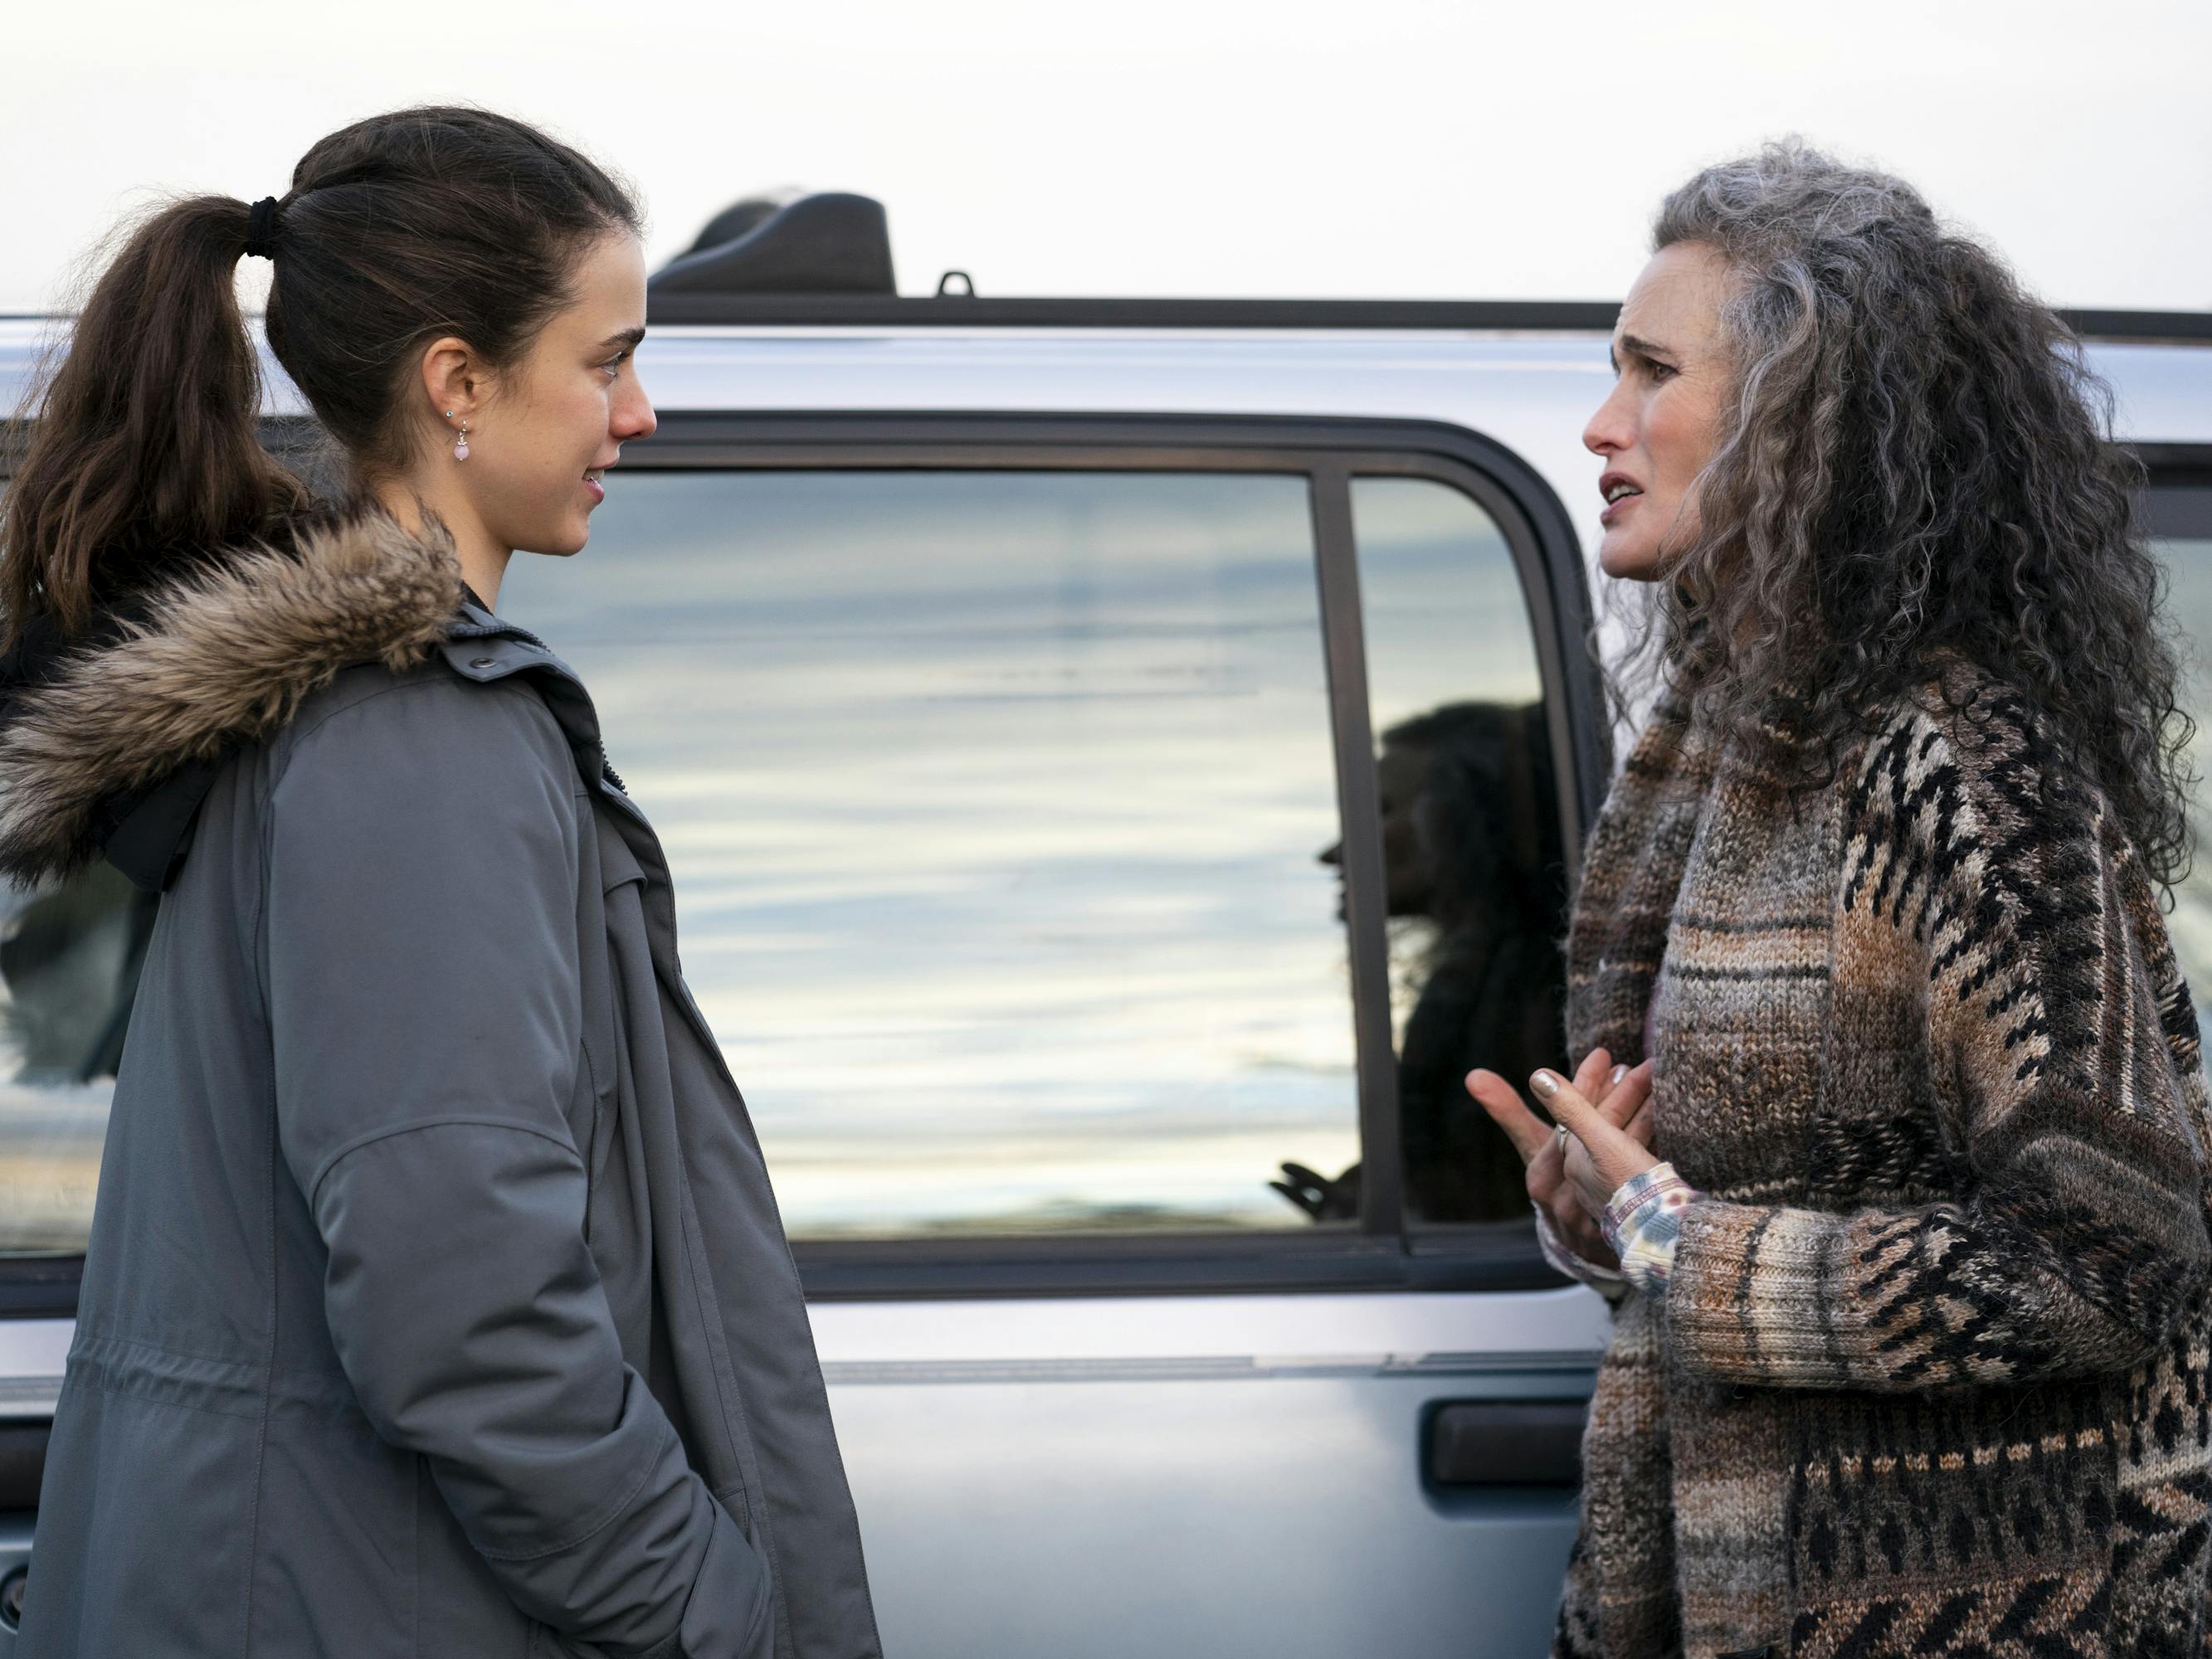 Alex Russell (Margaret Qualley) and Paula (Andie MacDowell) stand by a silver car. Russell wears a navy parka, and MacDowell wears a patterned sweater.